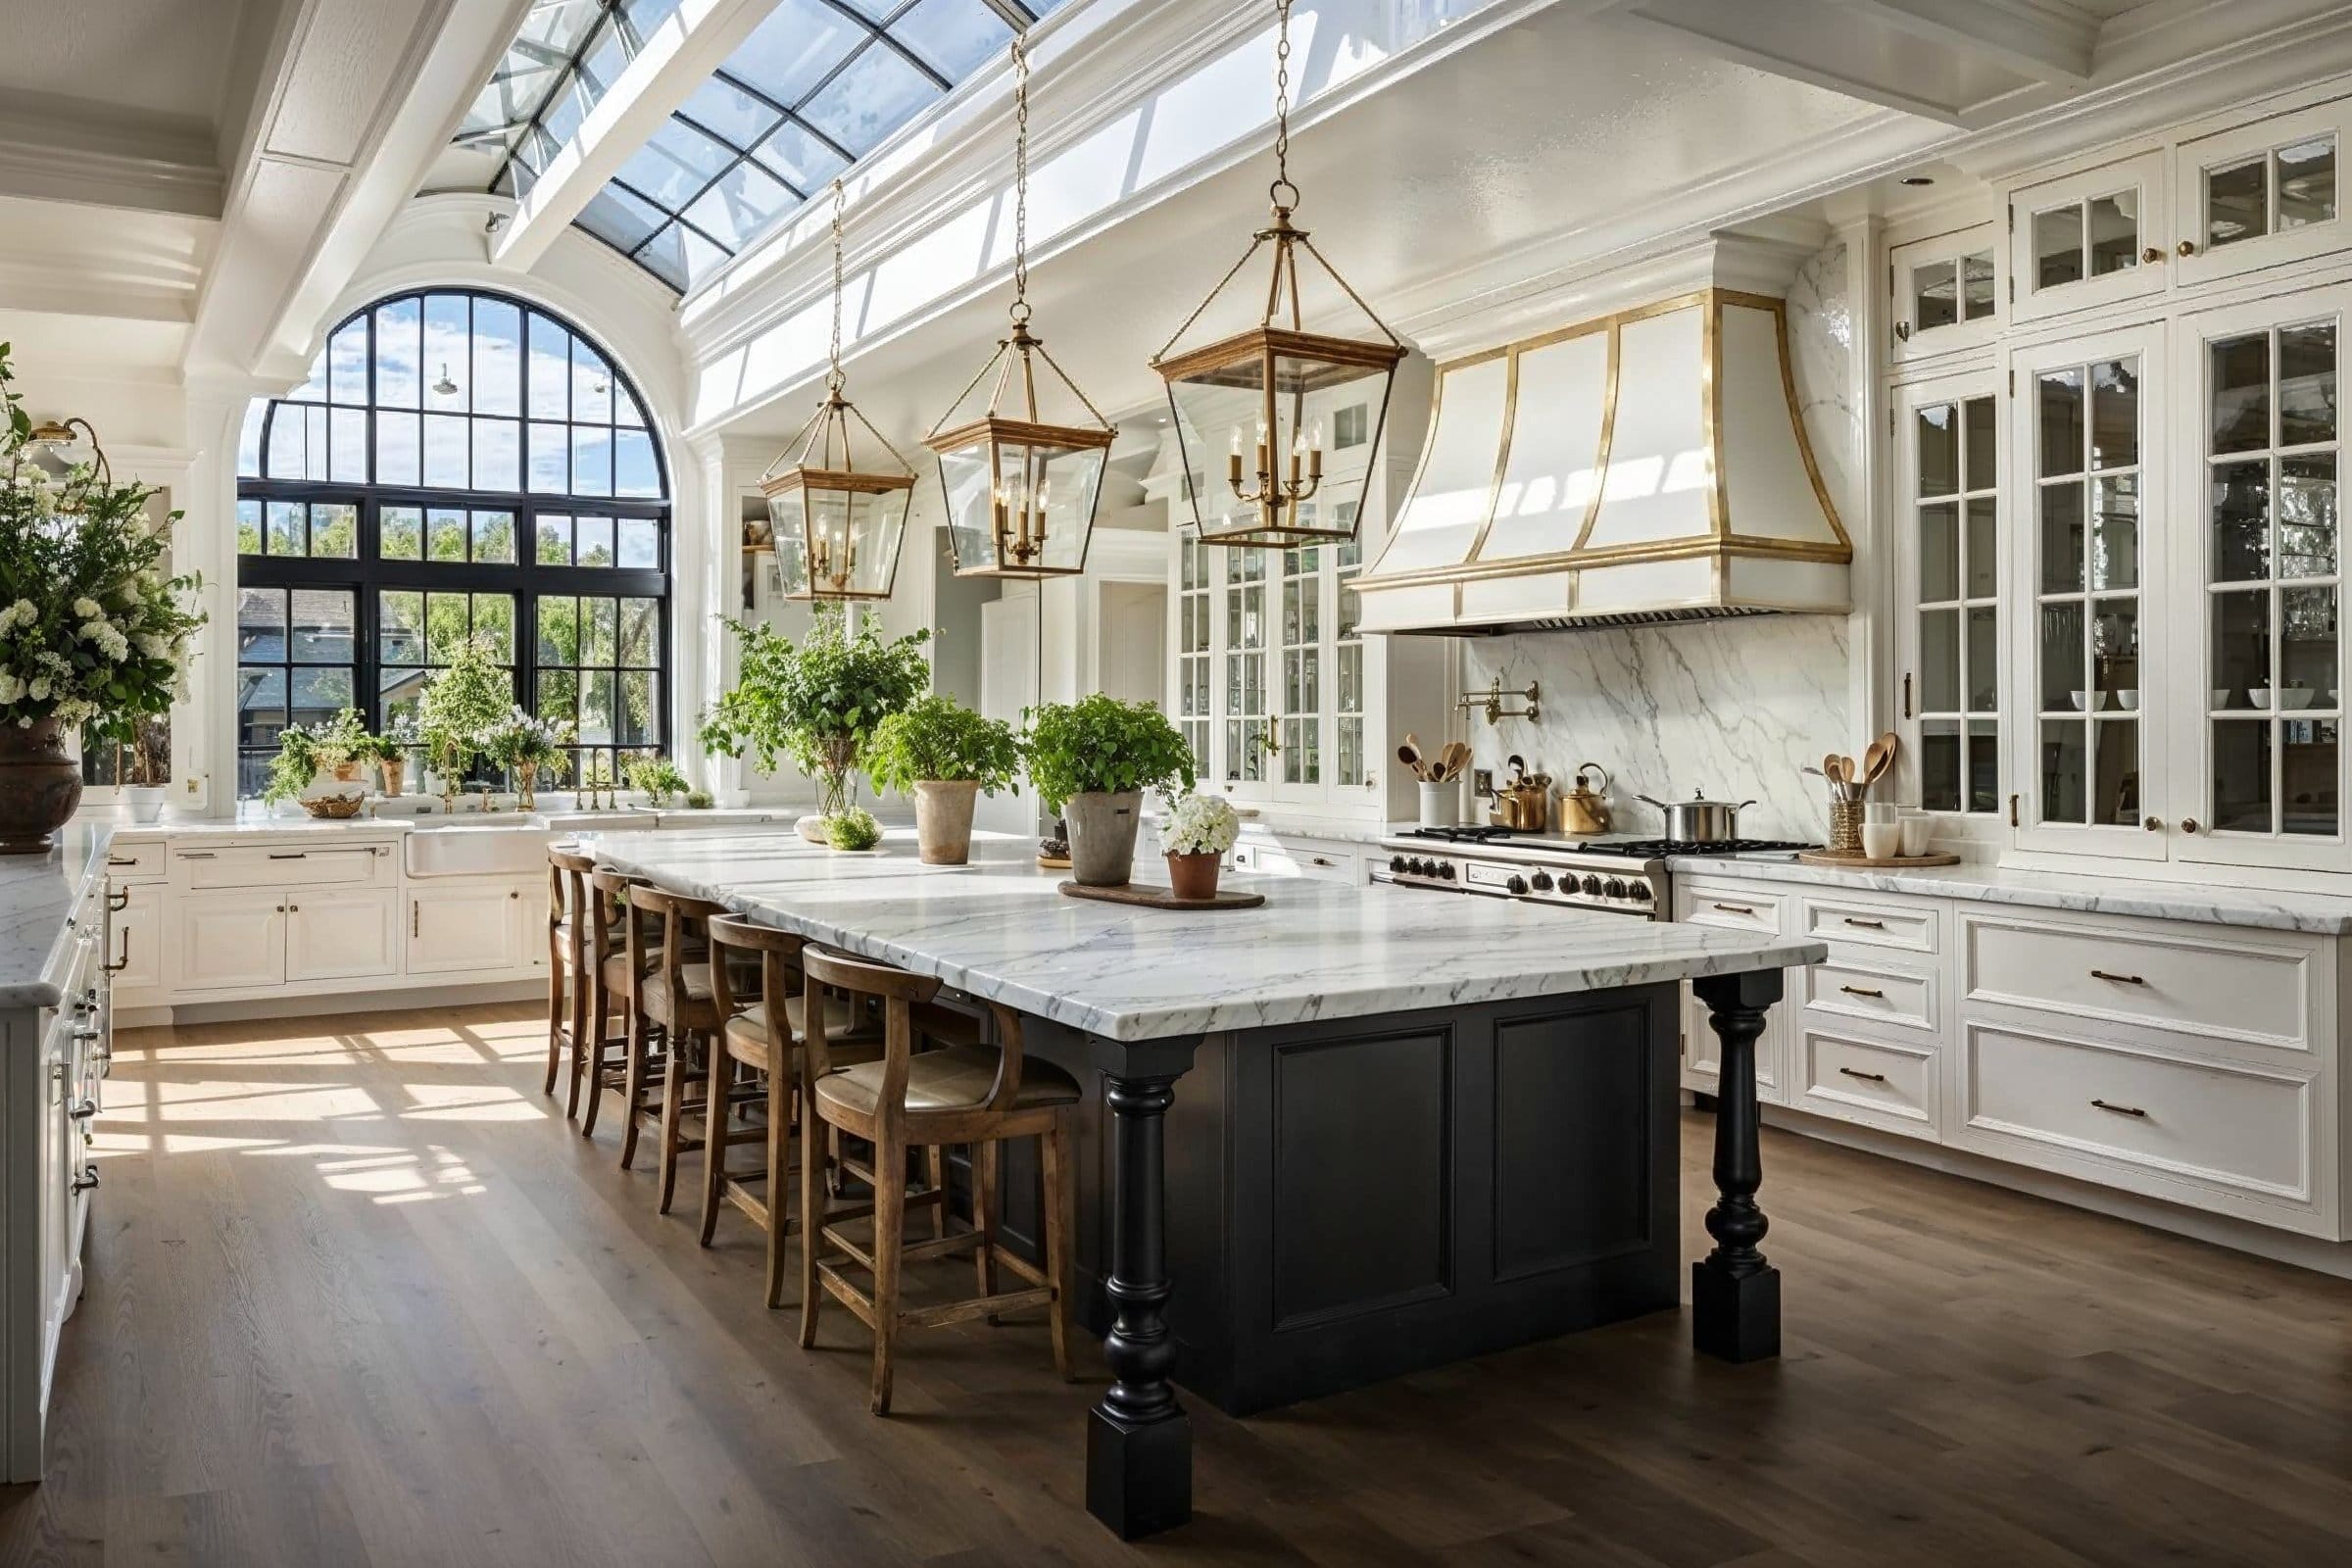 Brand Feature: Kitchen Craft for European-Style Cabinets